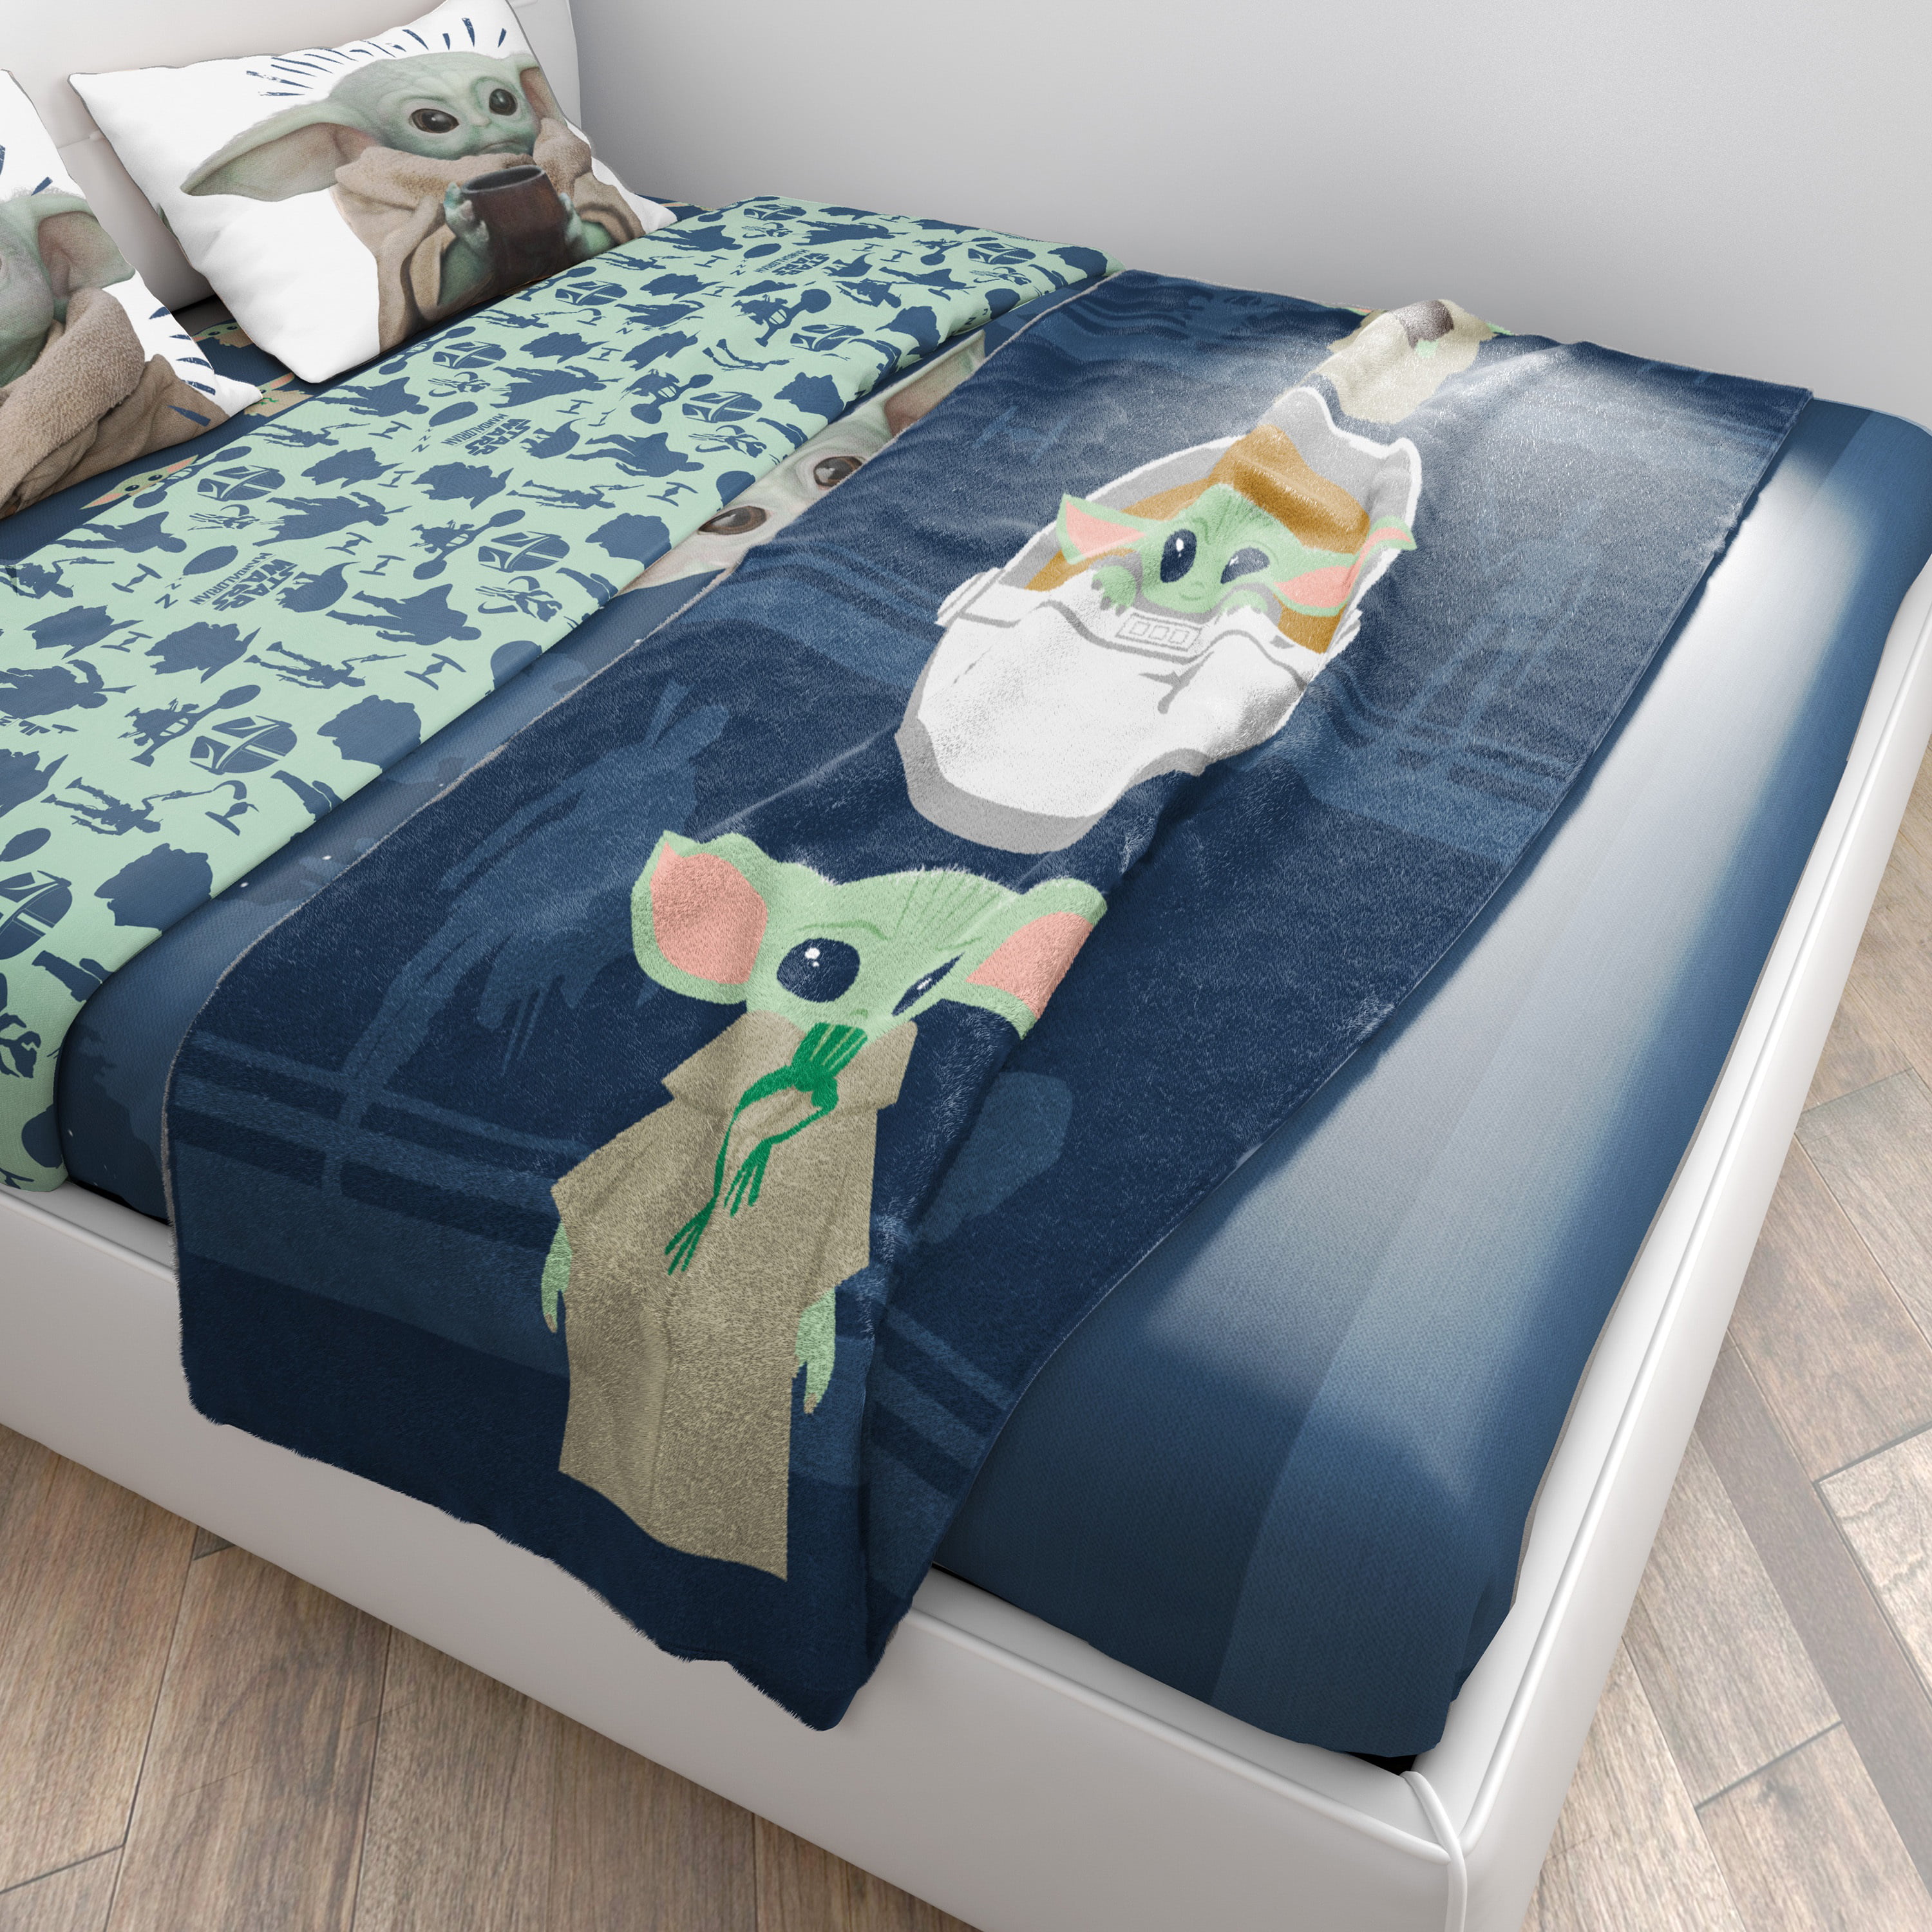 Fade Resistant Super Soft Fleece Measures 46 x 60 inches Kids Bedding Features The Child Baby Yoda Official Star Wars Product Jay Franco Star Wars The Mandalorian My Good Side Throw